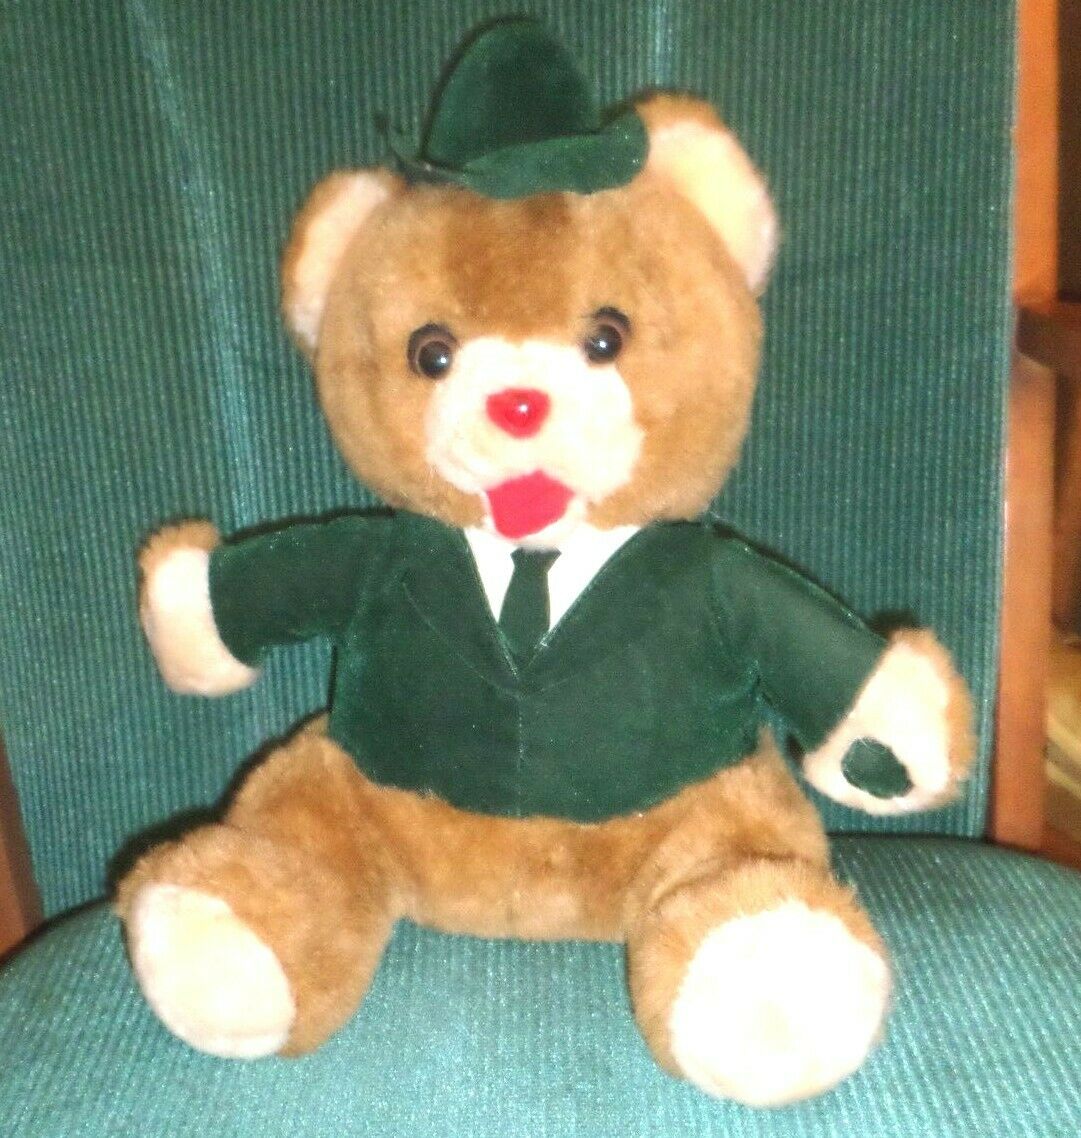 Collectible Vintage 1985  12" Smart Sam Recording/repeating/talking Teddy Bear